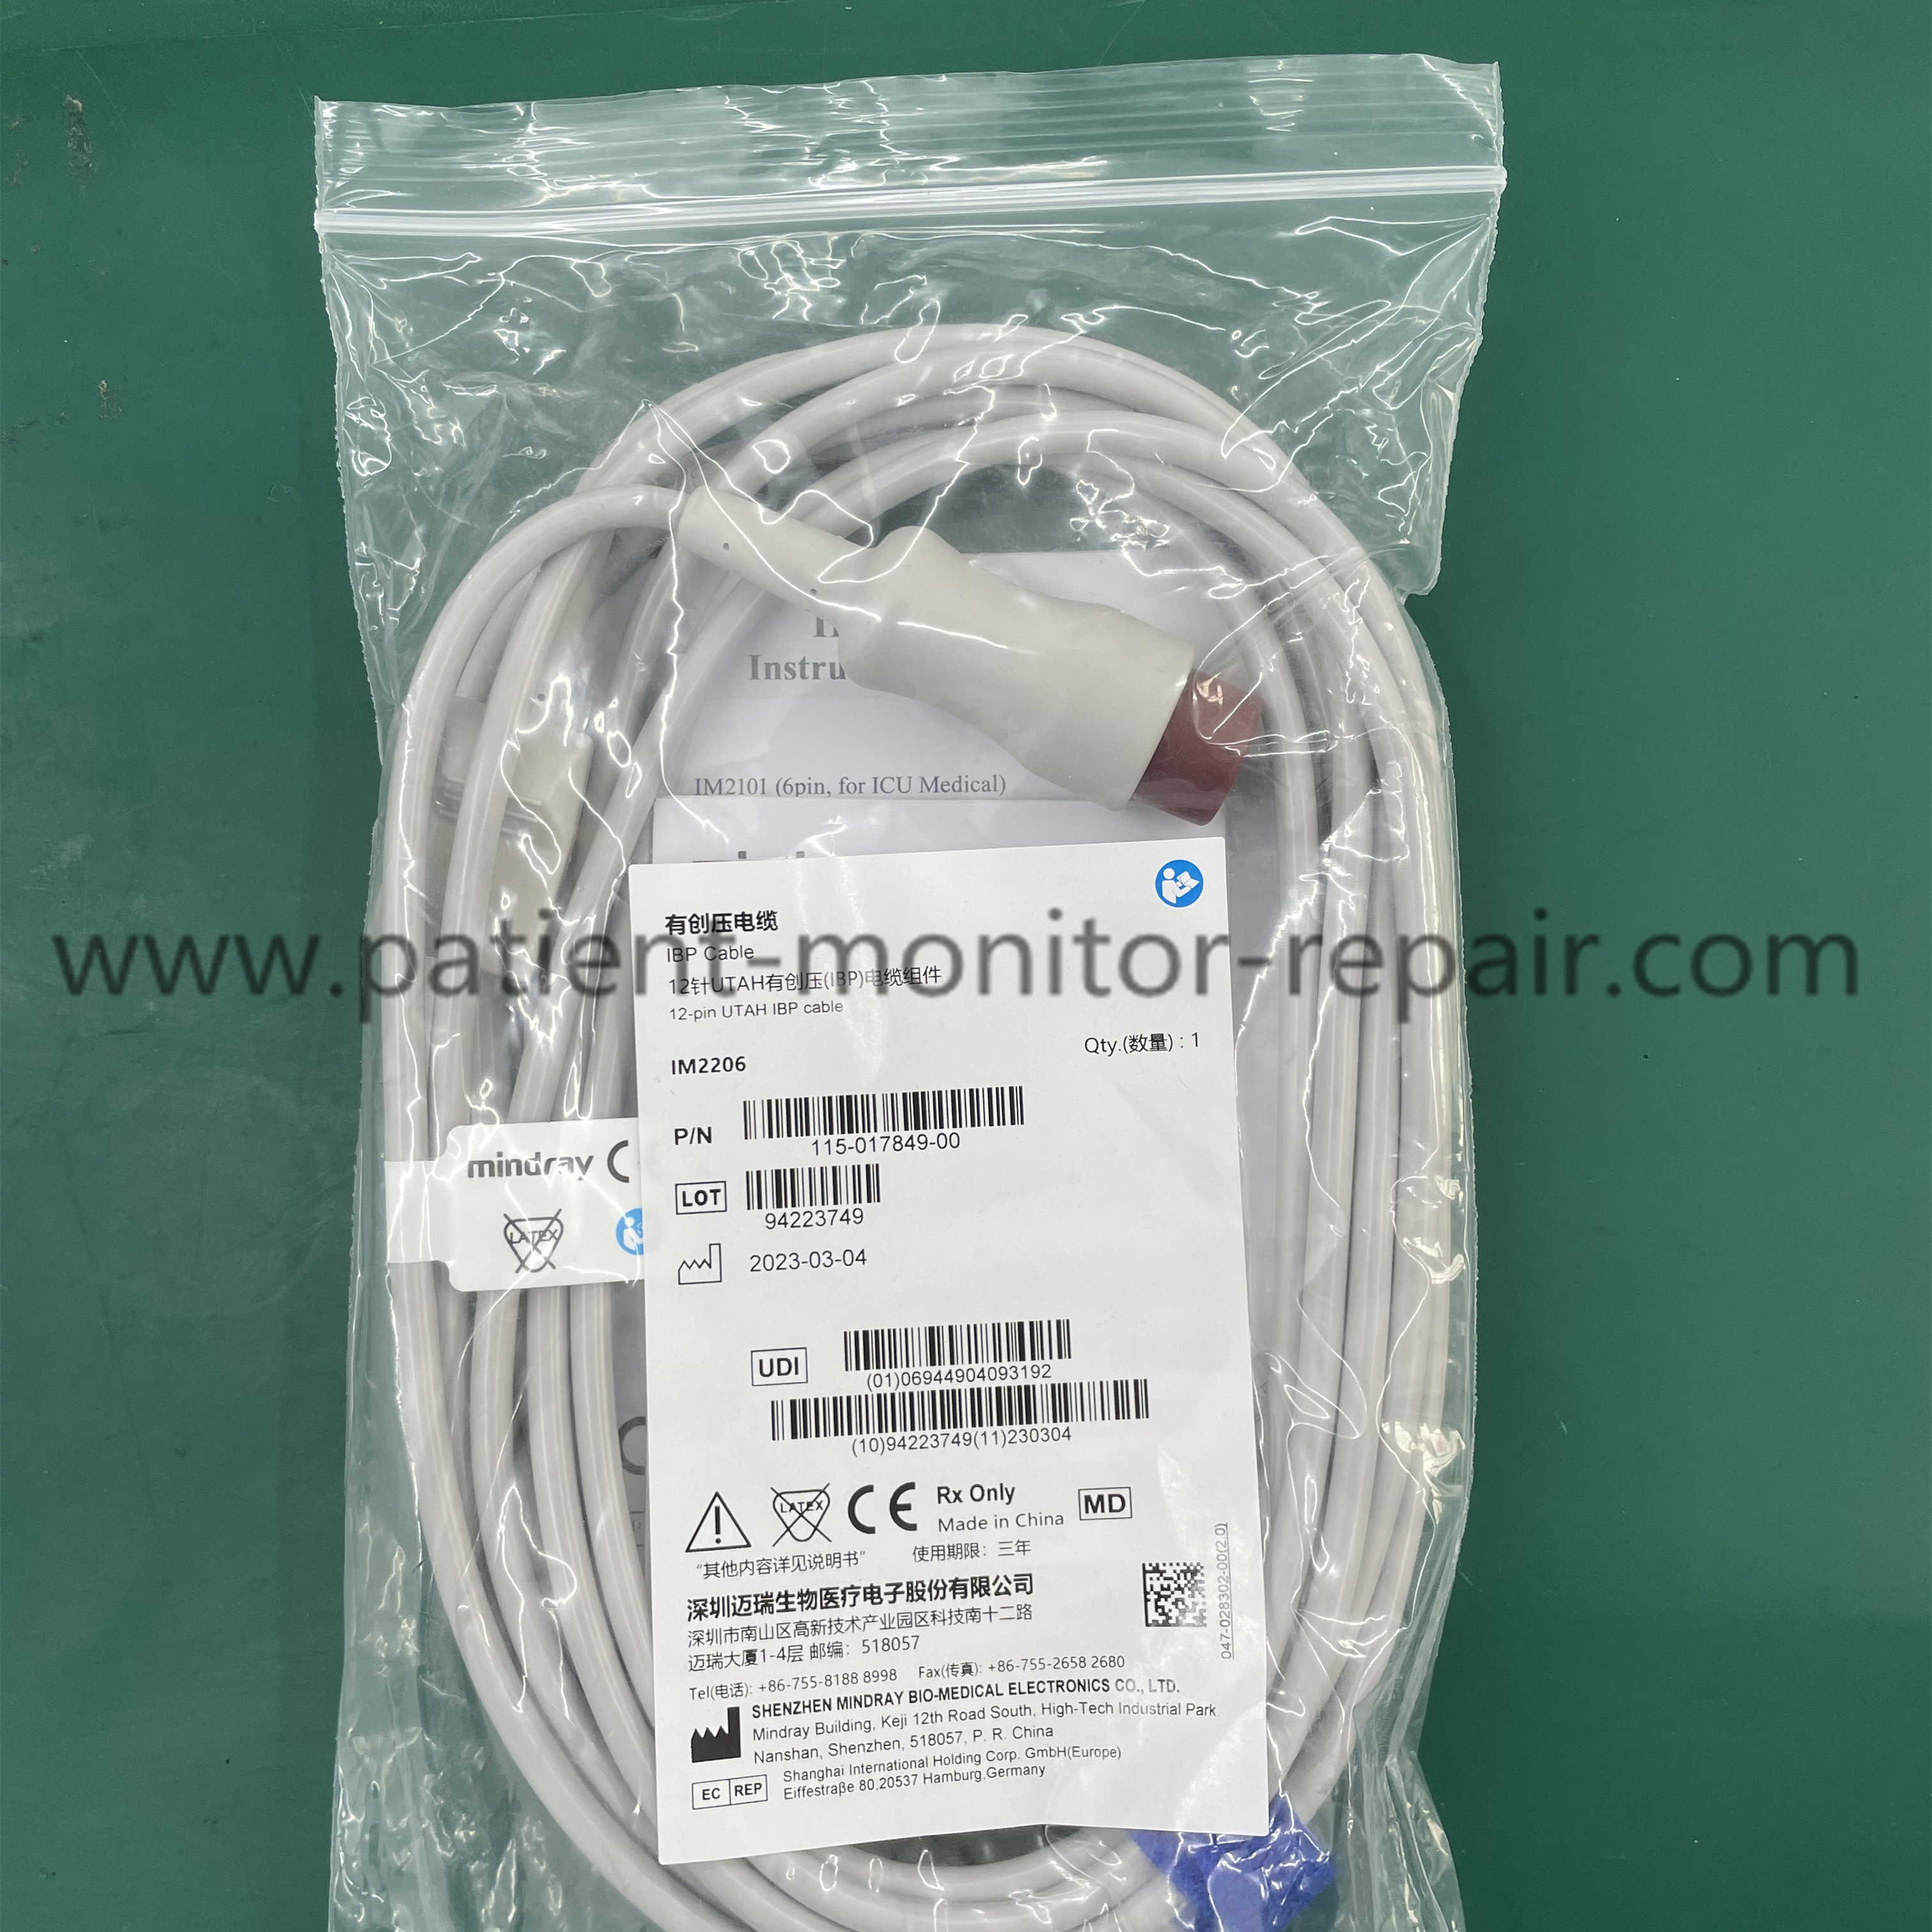 Mindray IPMTN 12 Pin IBP Cable IM2206 (for UTAH) P/N: 115-017849-00 Reusable